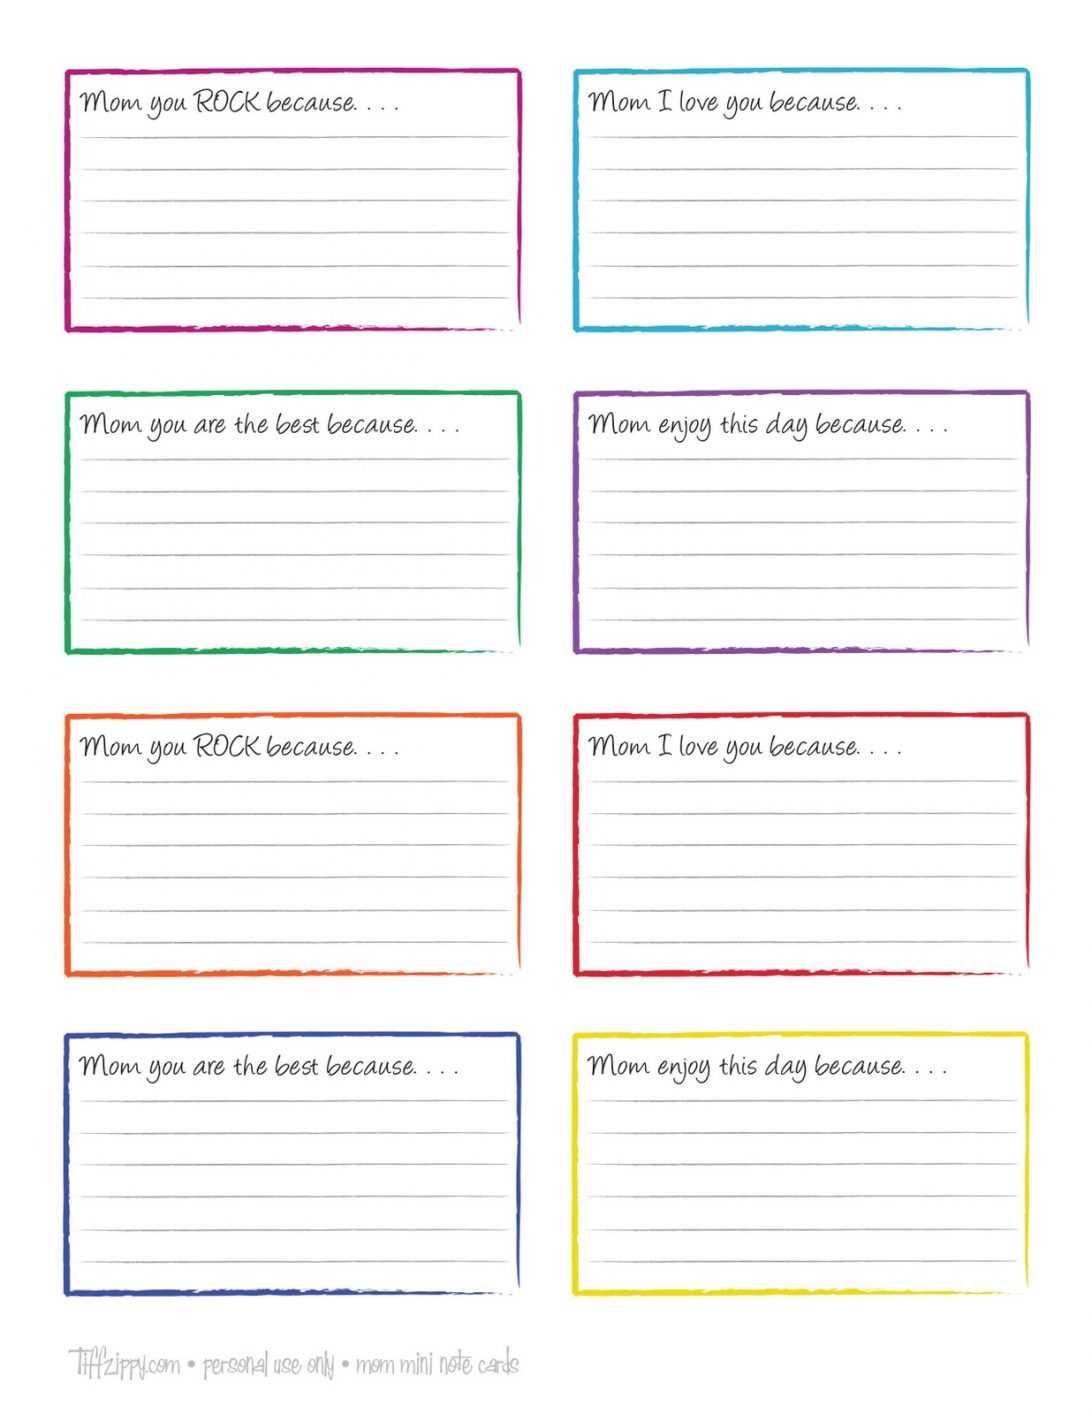 Index Card Template Free Recipe 3X5 For Mac 4X6 Pages Blank With 4X6 Photo Card Template Free